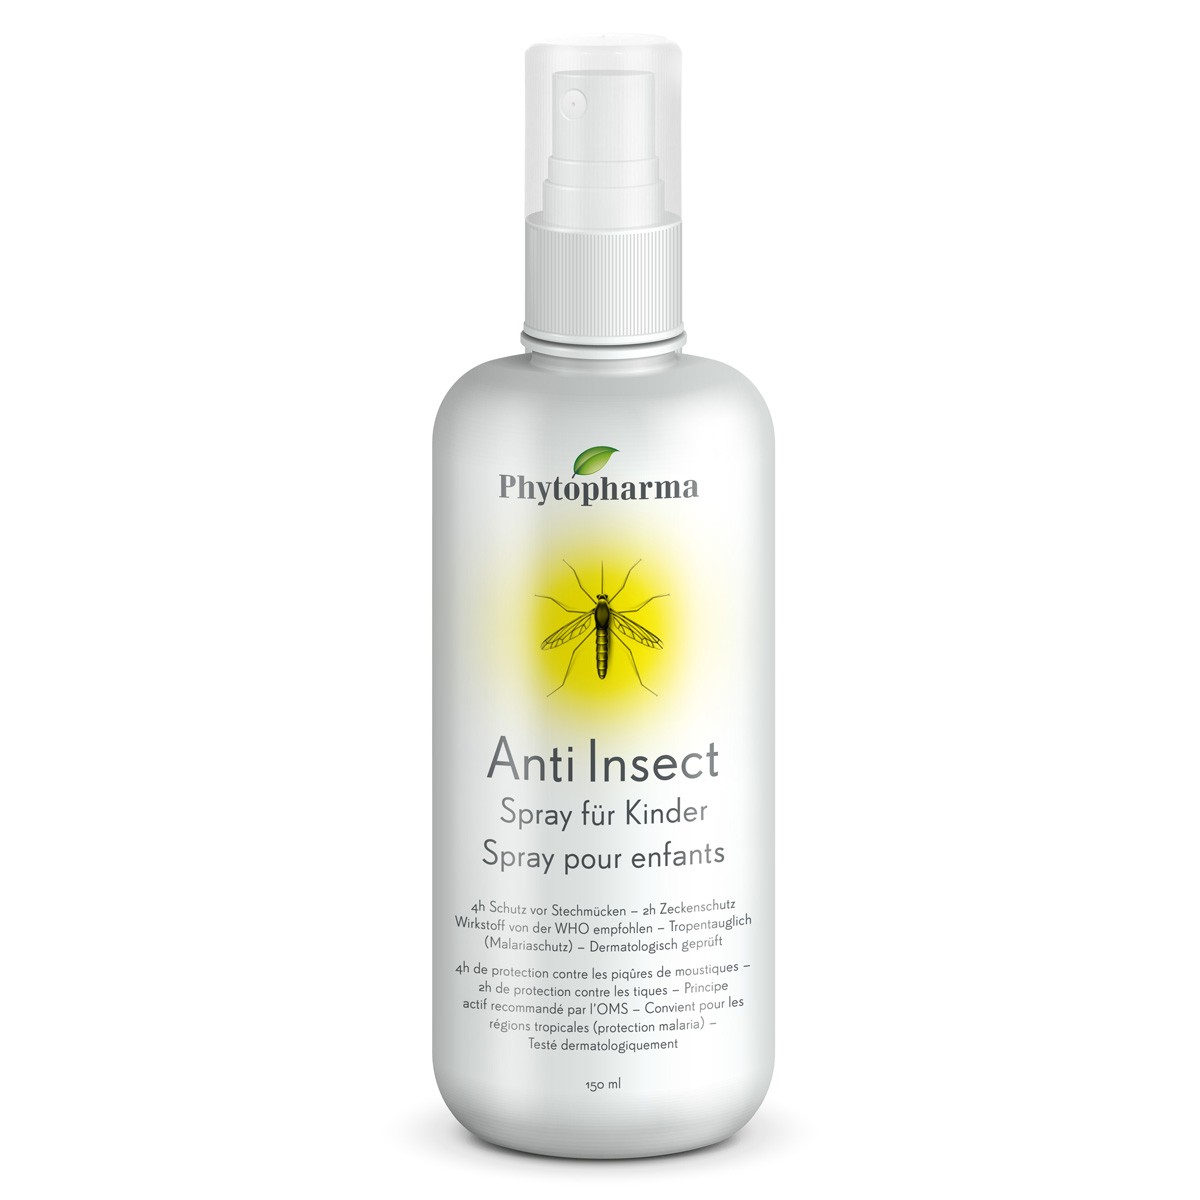 Image of Phytopharma Anti Insect Spray für Kinder (150ml)